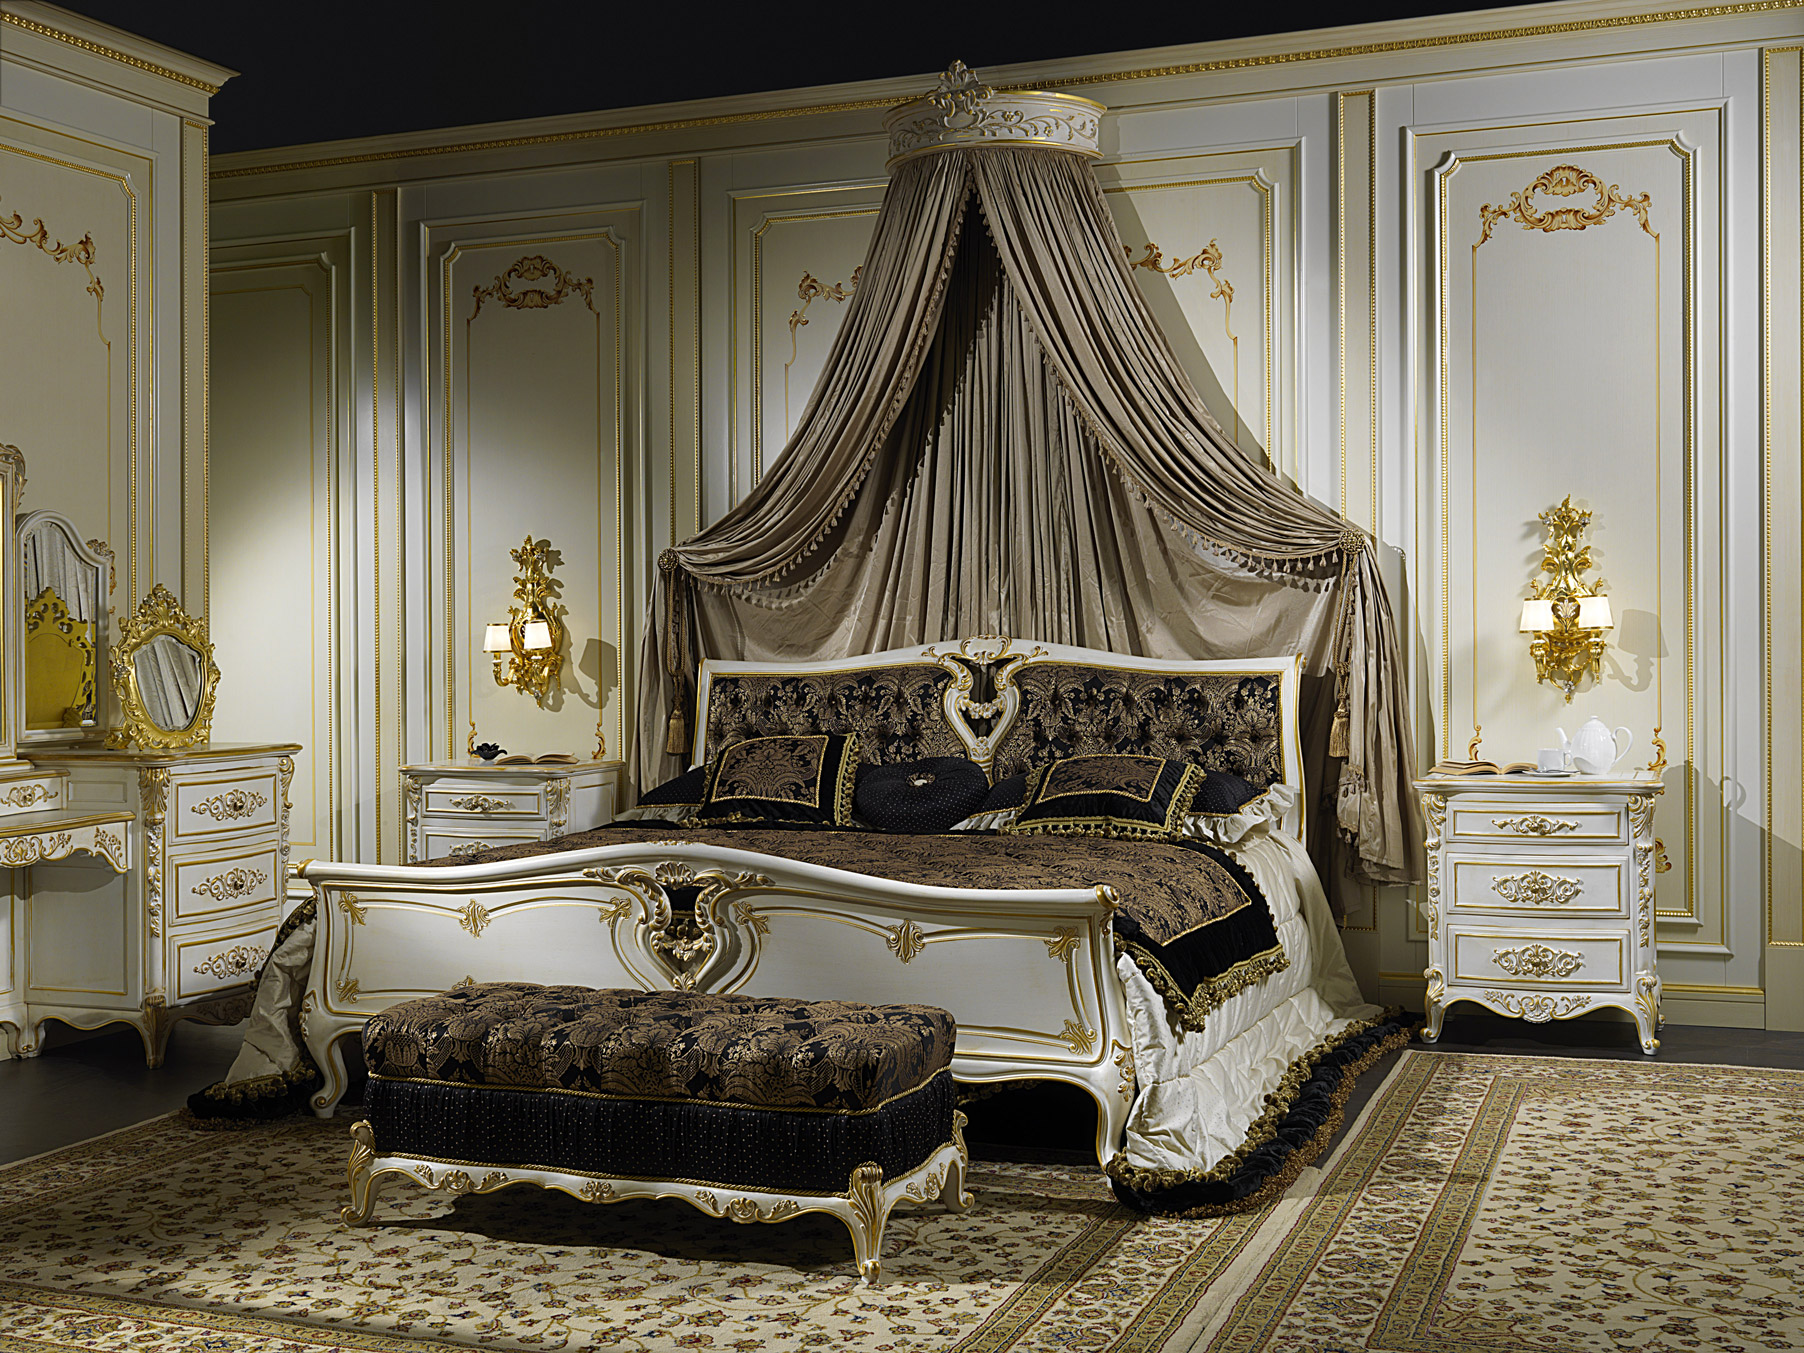 Made in Italy luxury furniture